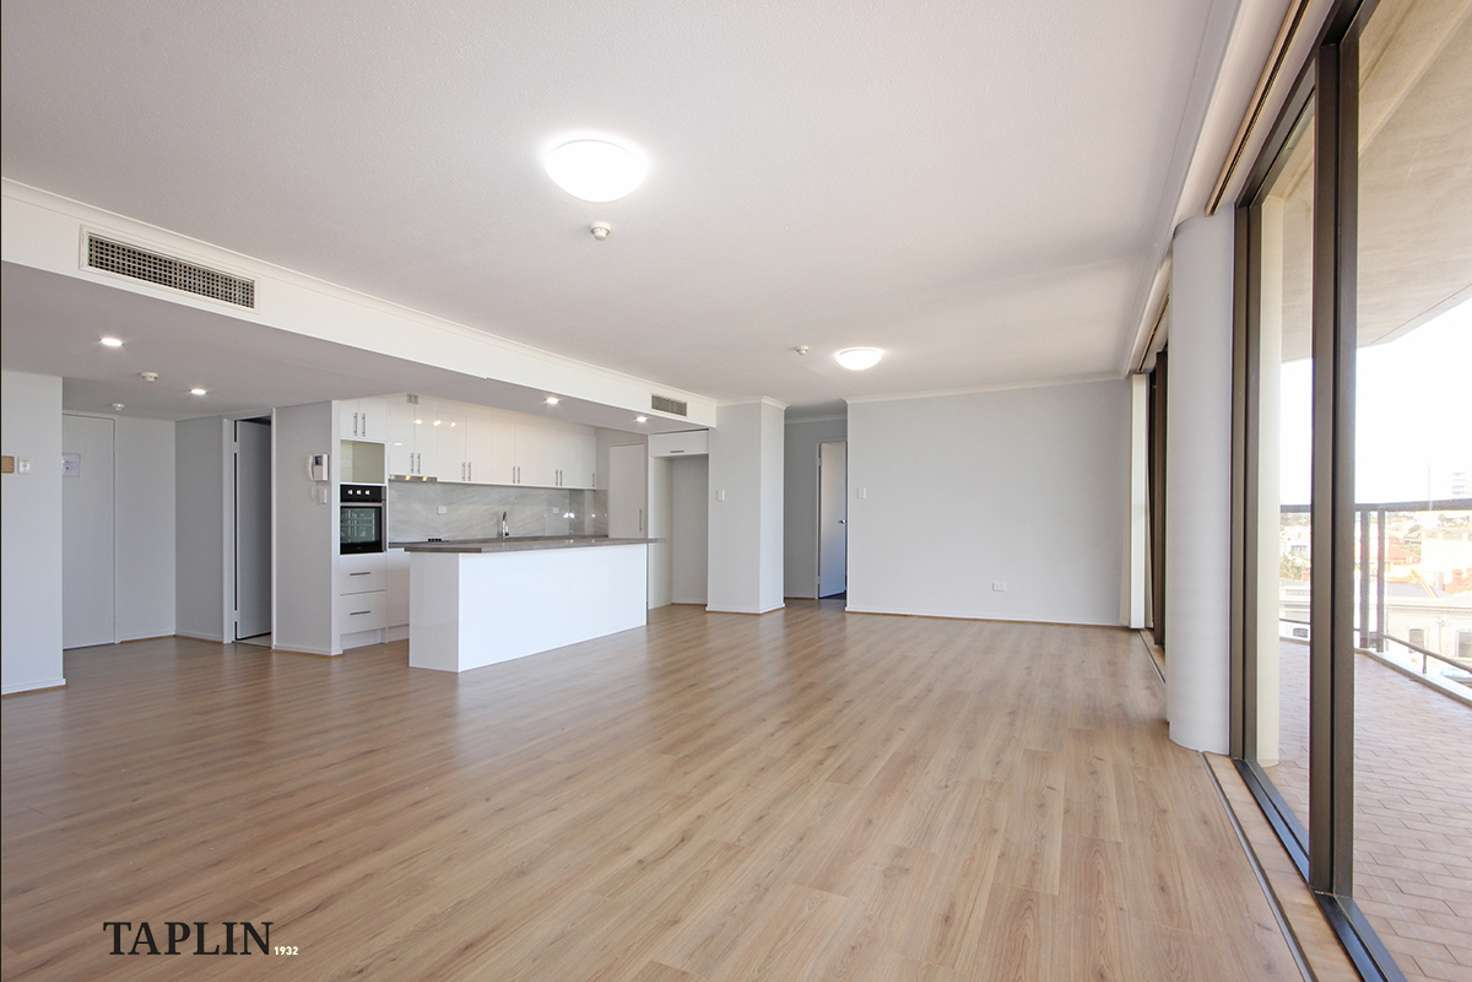 Main view of Homely apartment listing, 52/5-11 Colley Terrace, Glenelg SA 5045